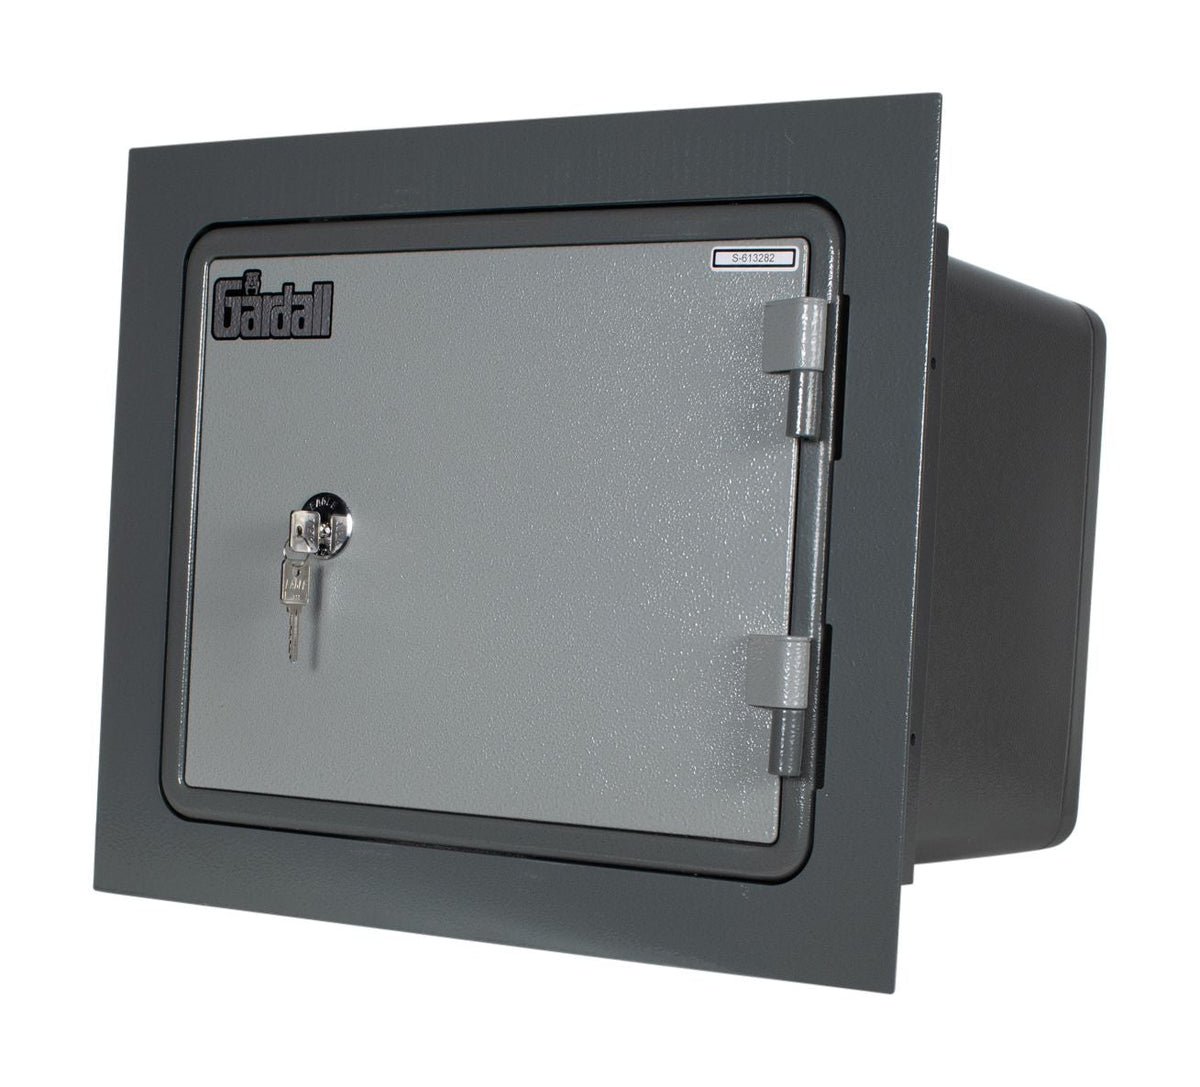 Gardall WMS912-G-K Fireproof Wall Safe (with flange)